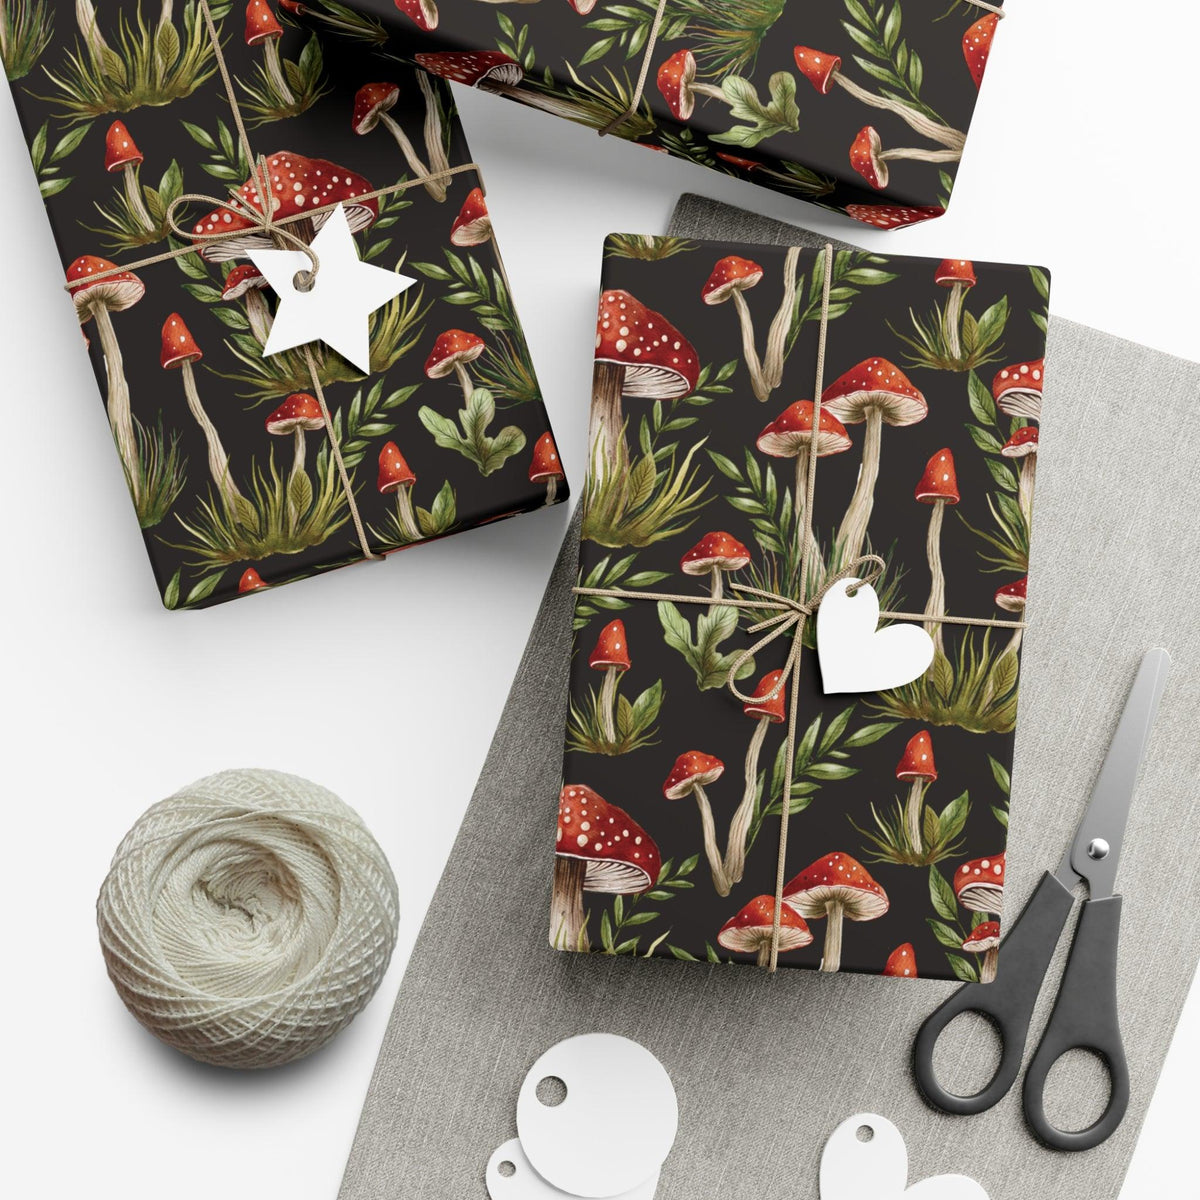 Bolsome 12 Sheets 28 * 20 Inches Mushroom Wrapping Paper Black White Red  Mushroom Insect Plants Pattern Gift Wrap Paper for Birthday Christmas  Autumn